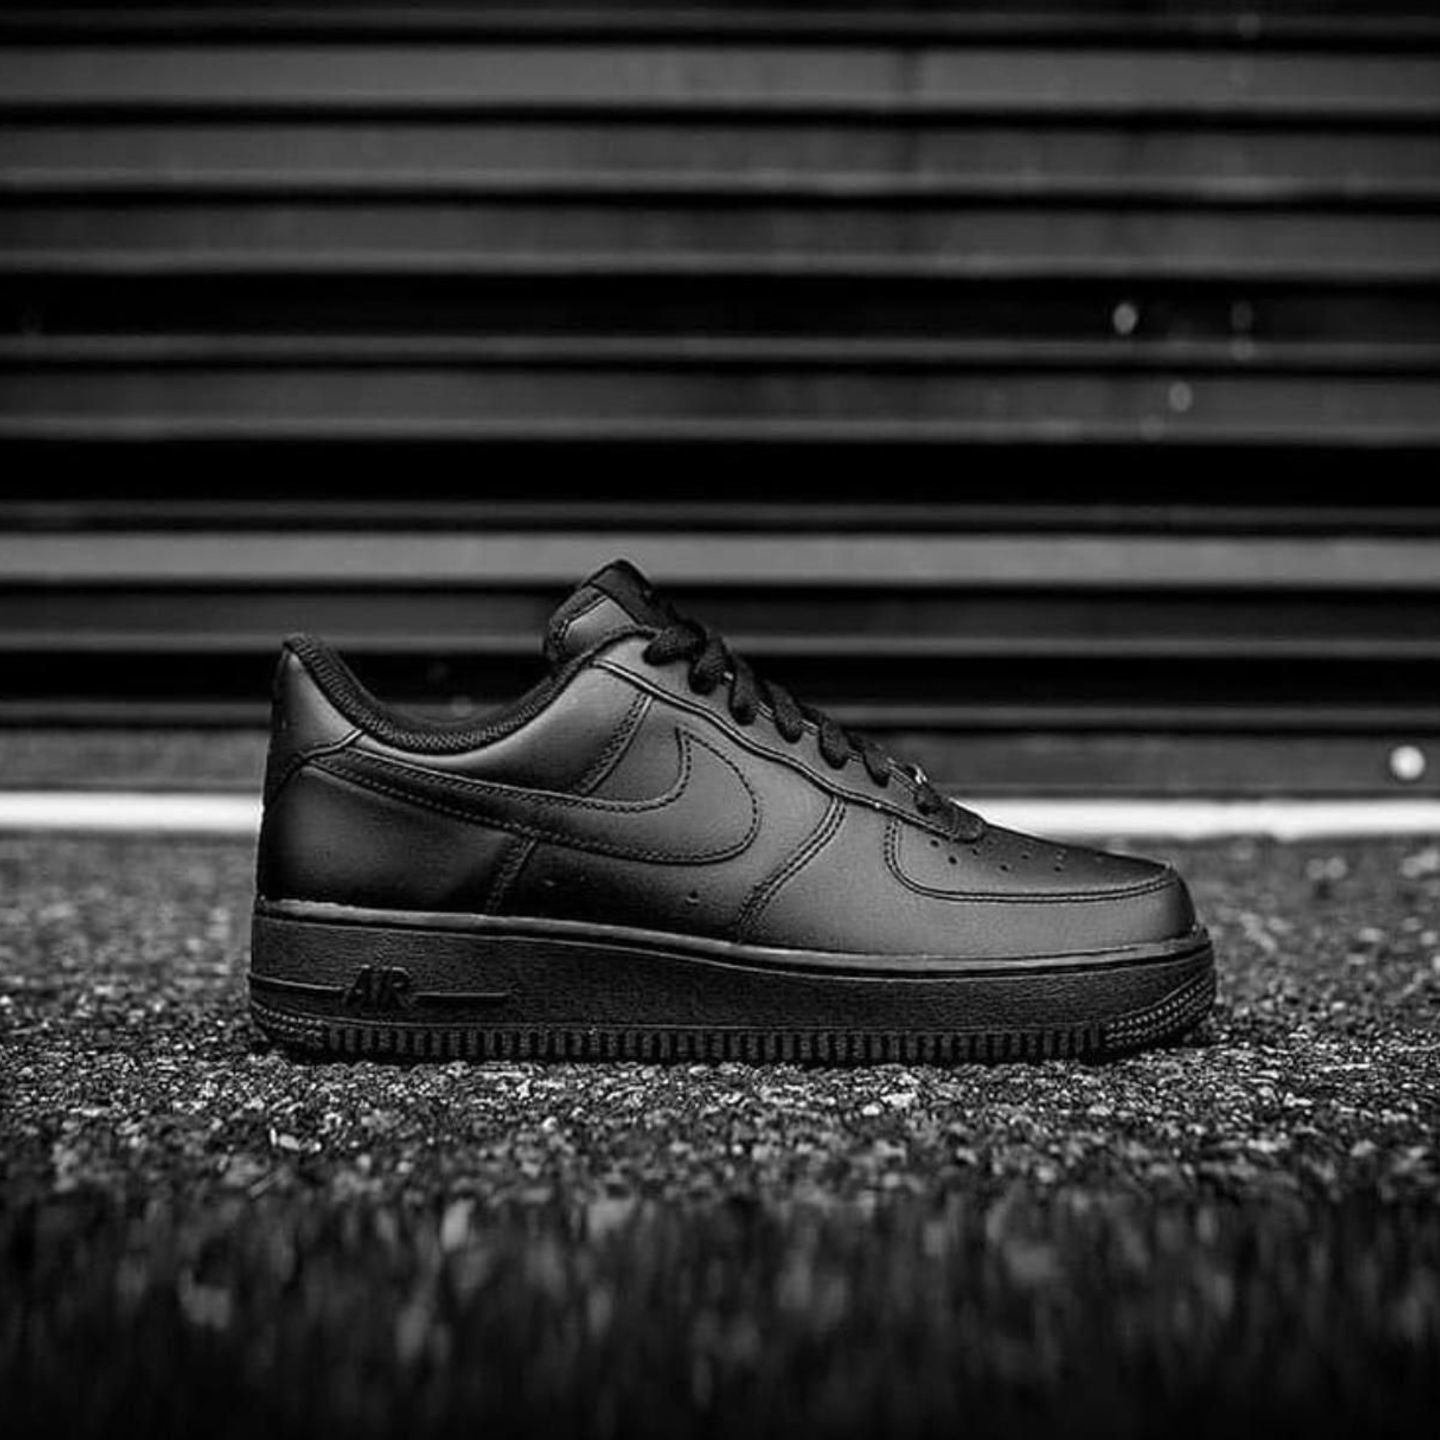 Insta Shoppee Nike Airforce Black Lethar Quality First Copy Sneaker Shoes